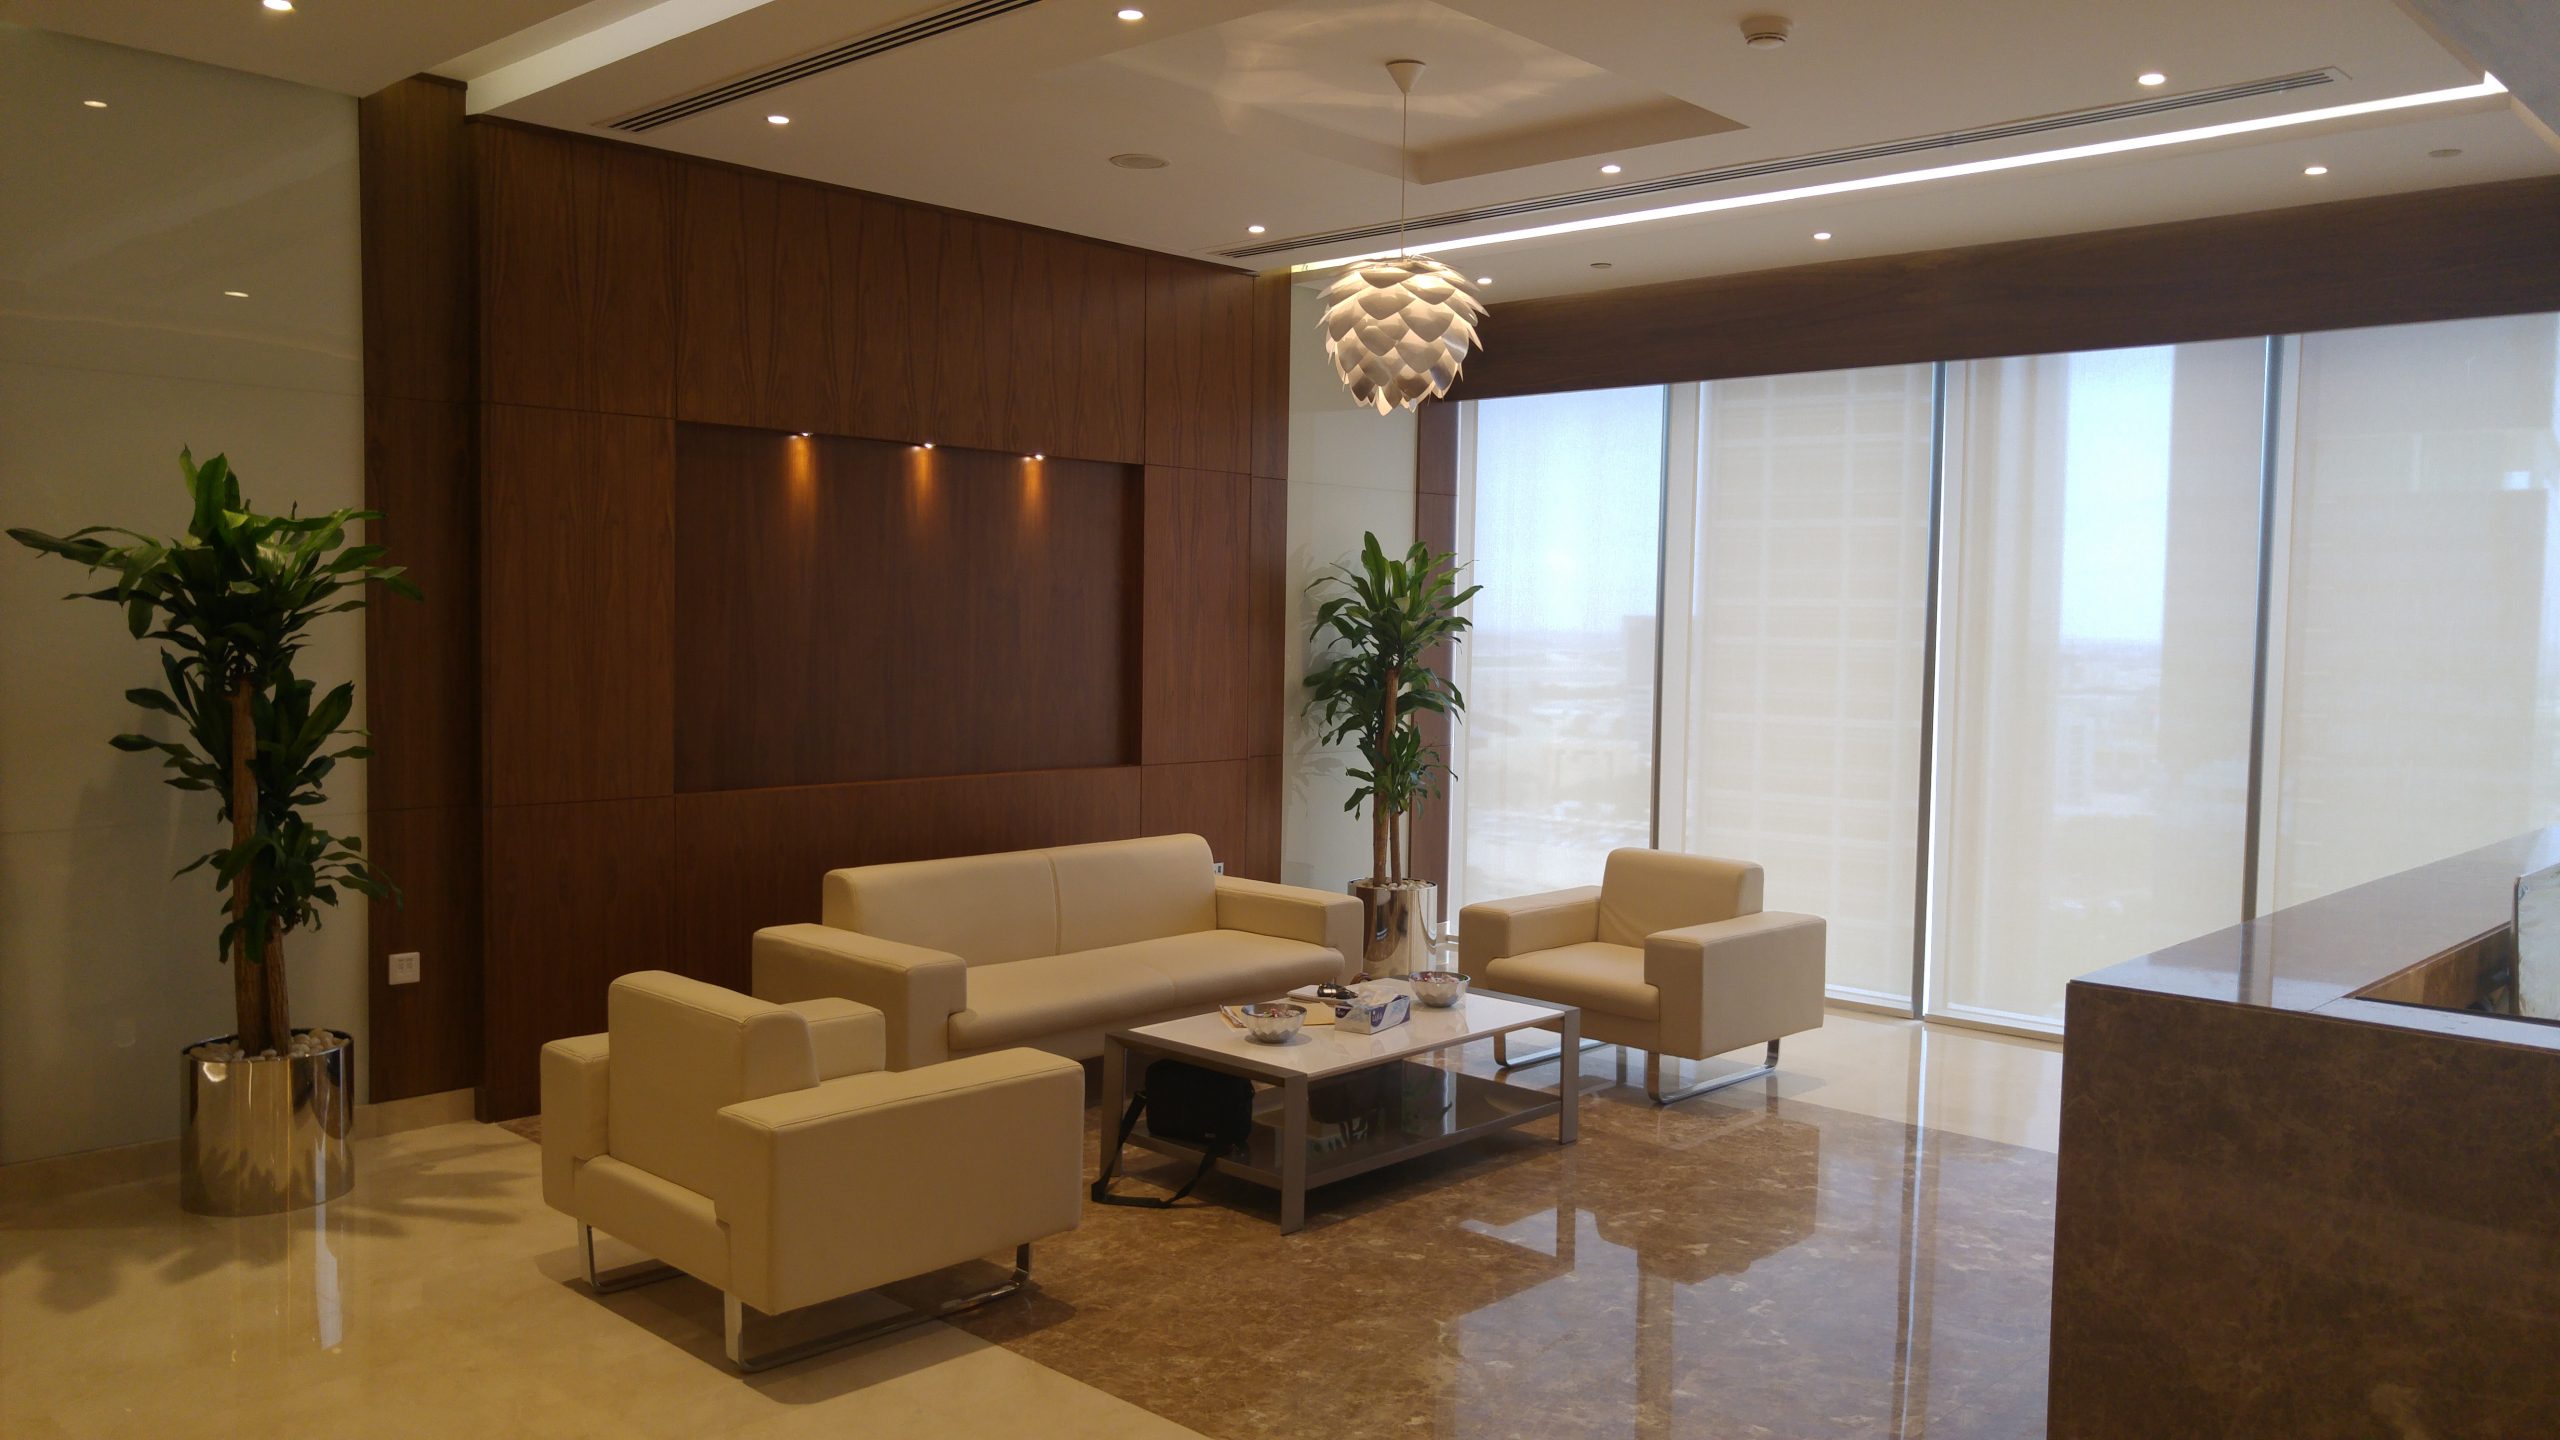 Tristar Real Estate Office | Commercial Office Interior Fit Out | Capstone